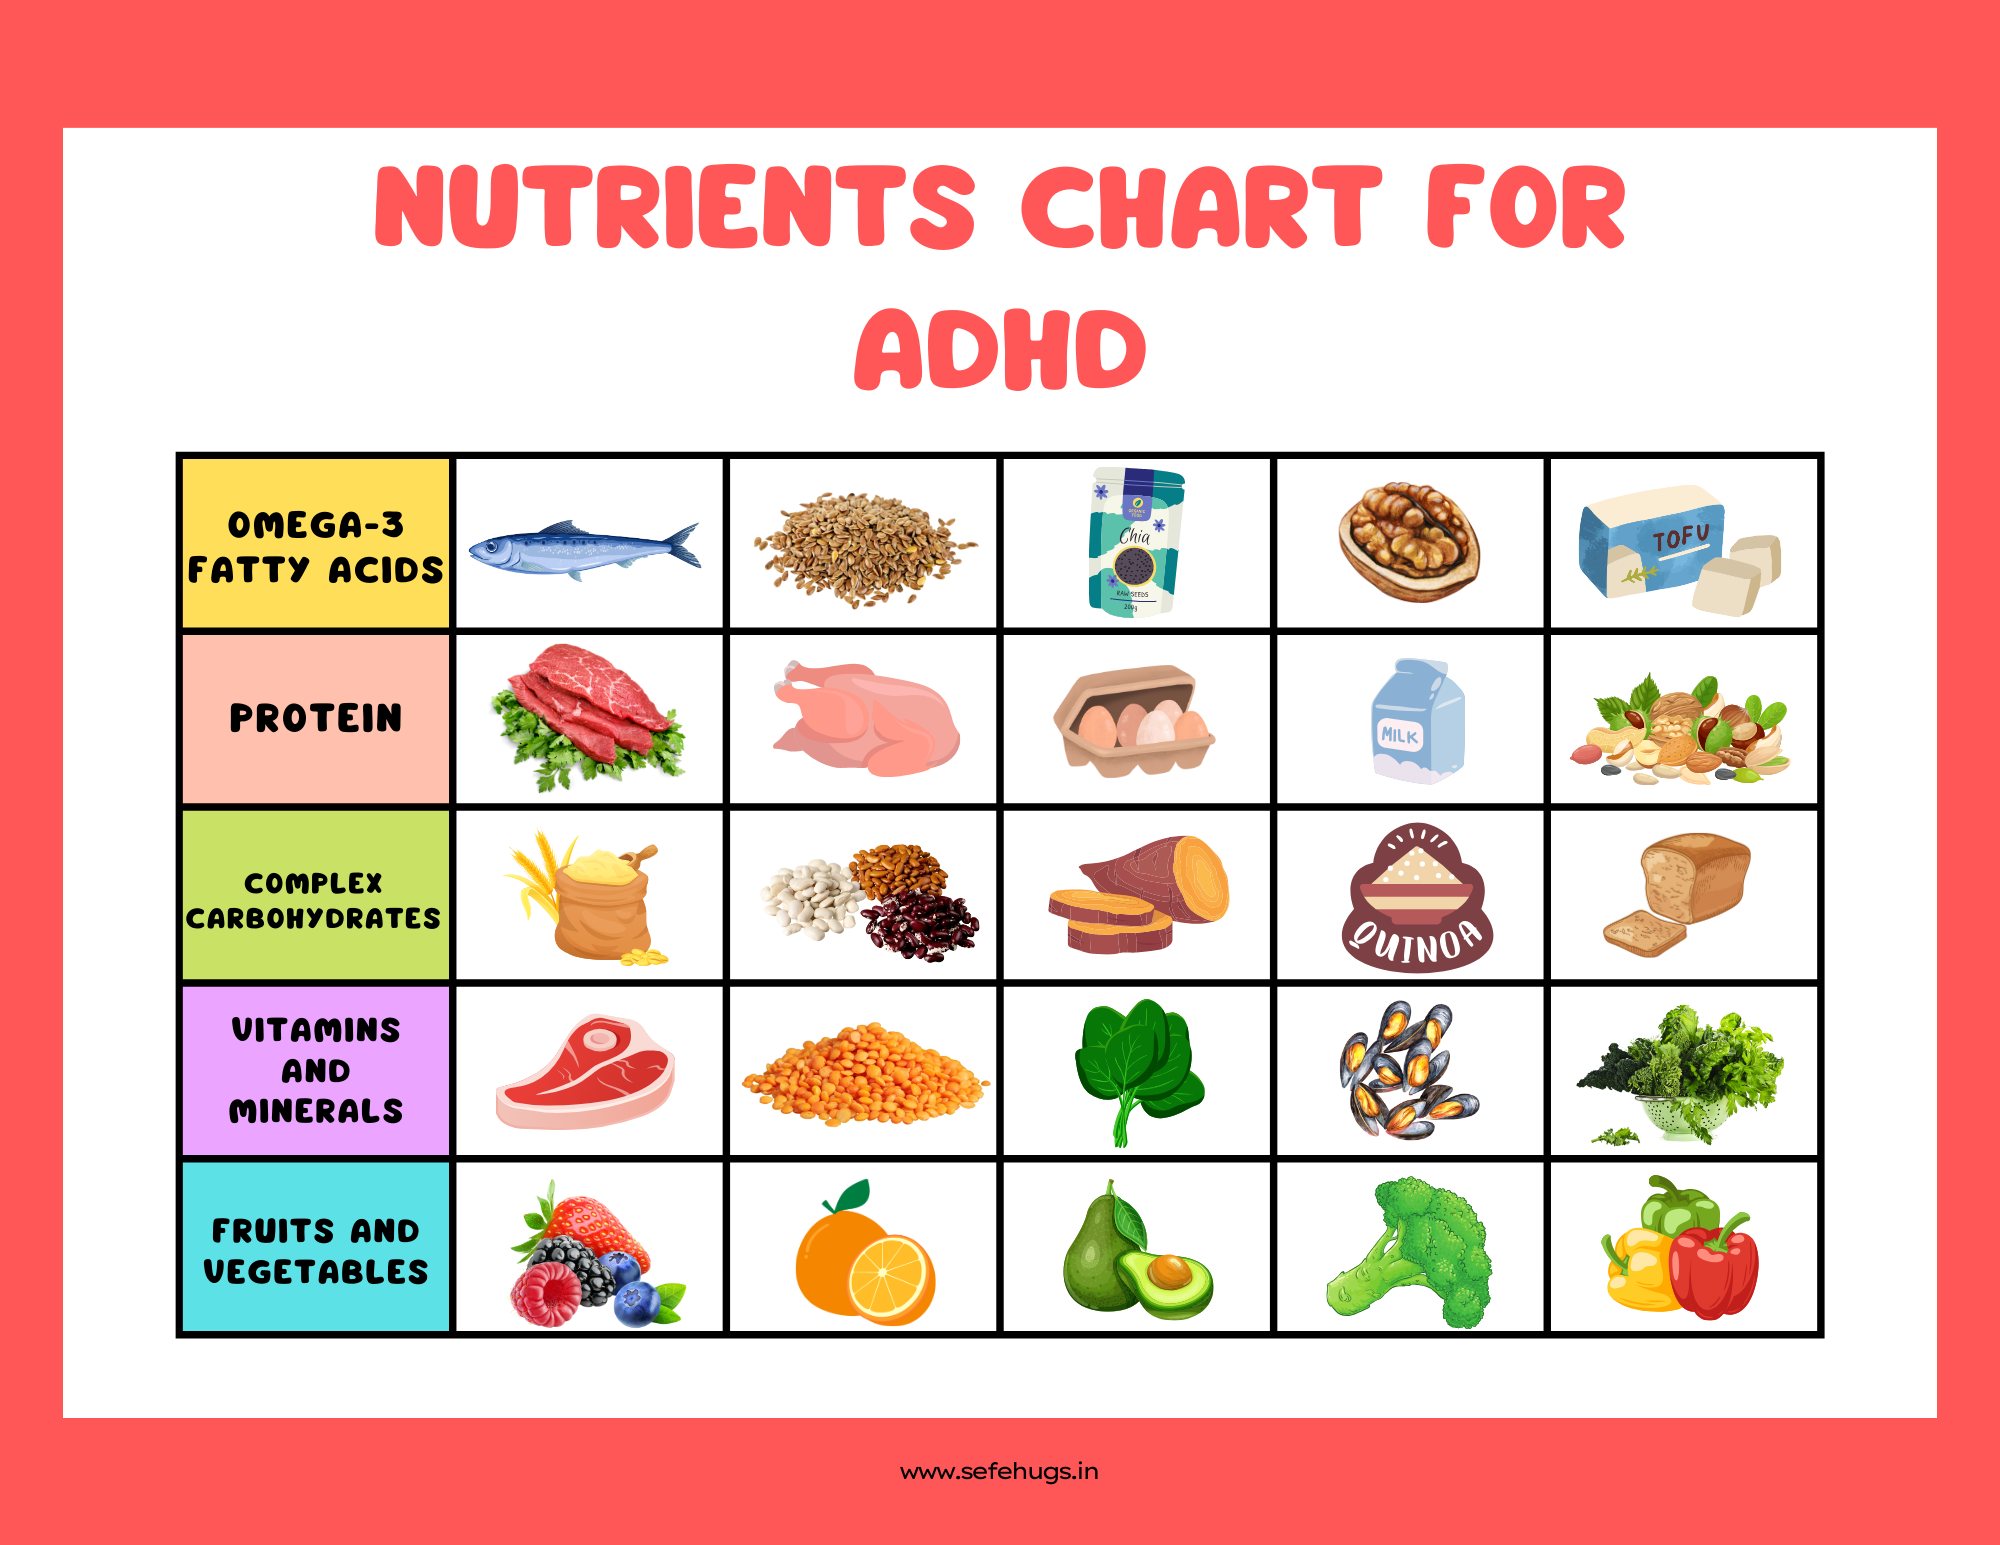 Nutrients chart for ADHD